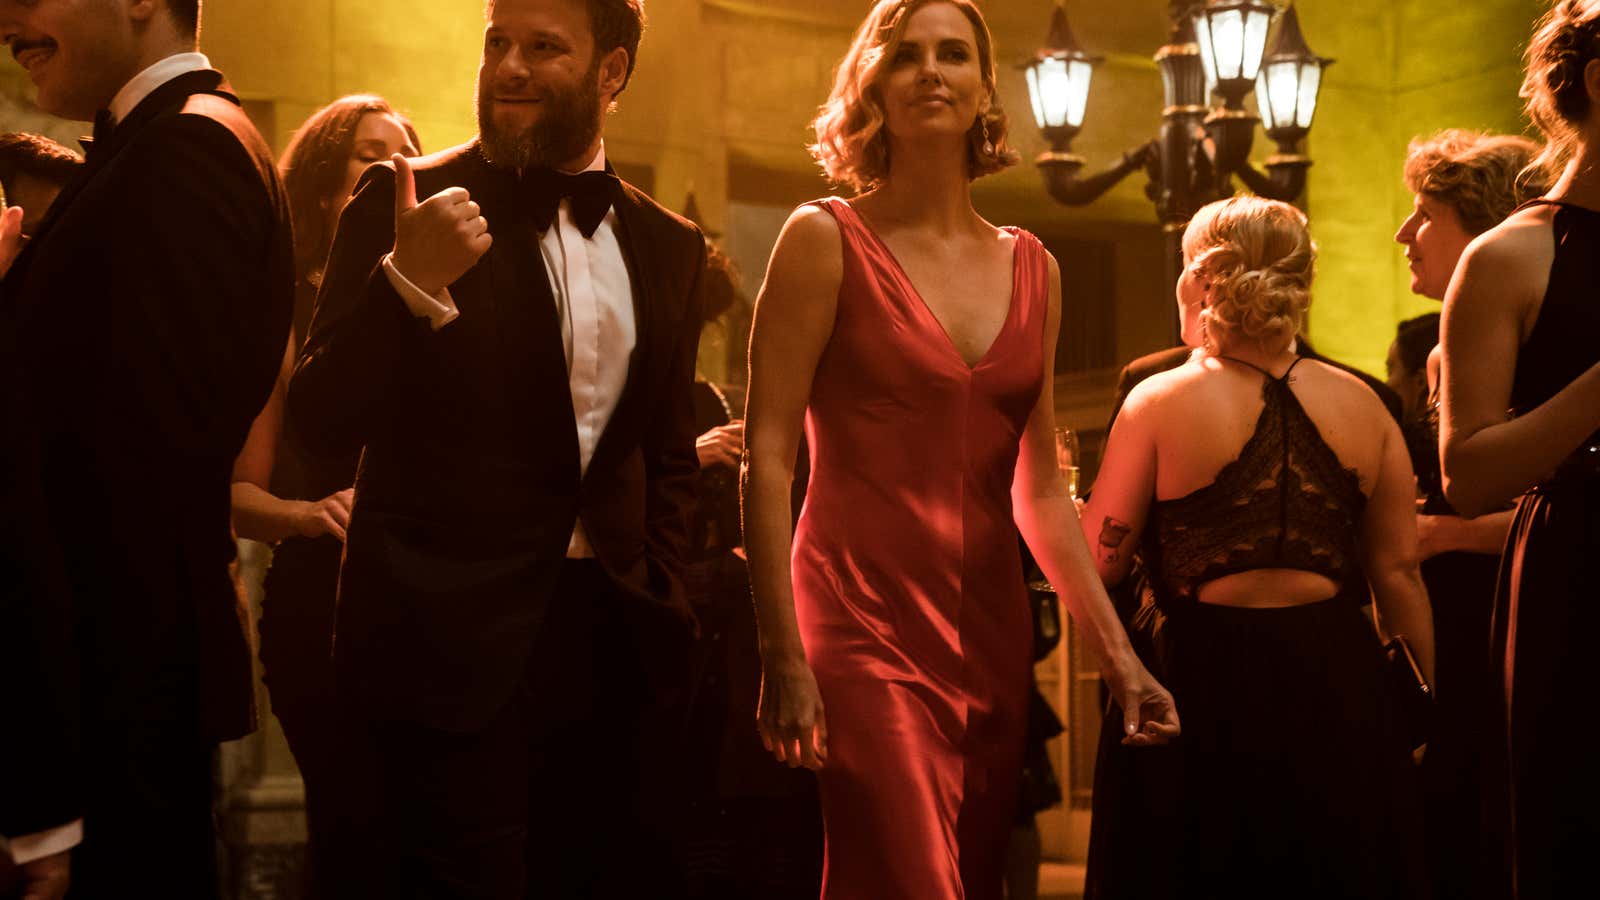 Seth Rogen woos Charlize Theron in the half-assed political rom-com <i>Long Shot</i>